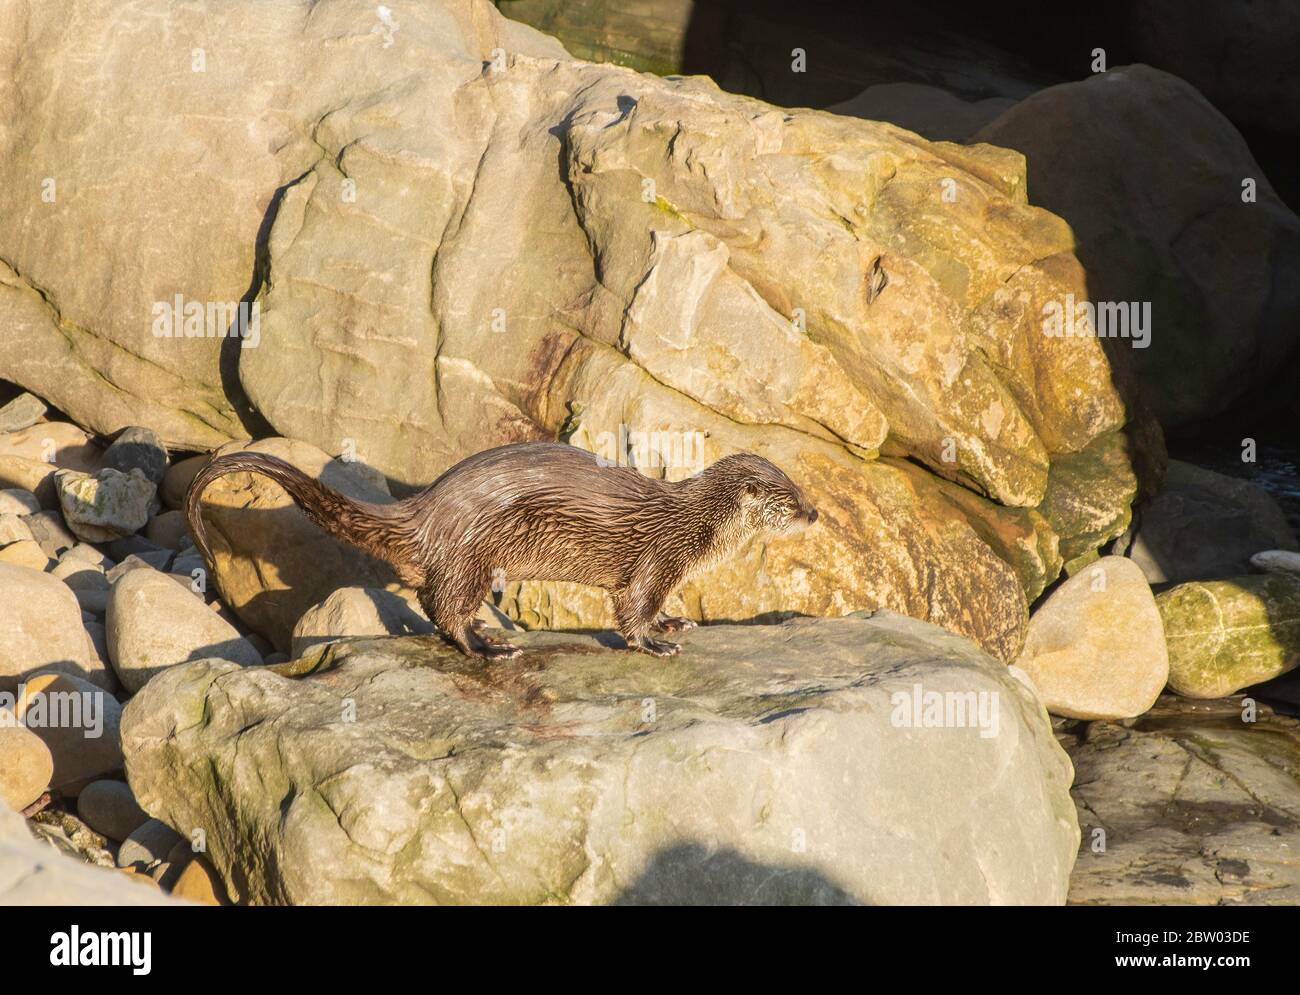 River Otter, Lutra canadensis, on the Pacific Coast in Sonoma County, California. Stock Photo